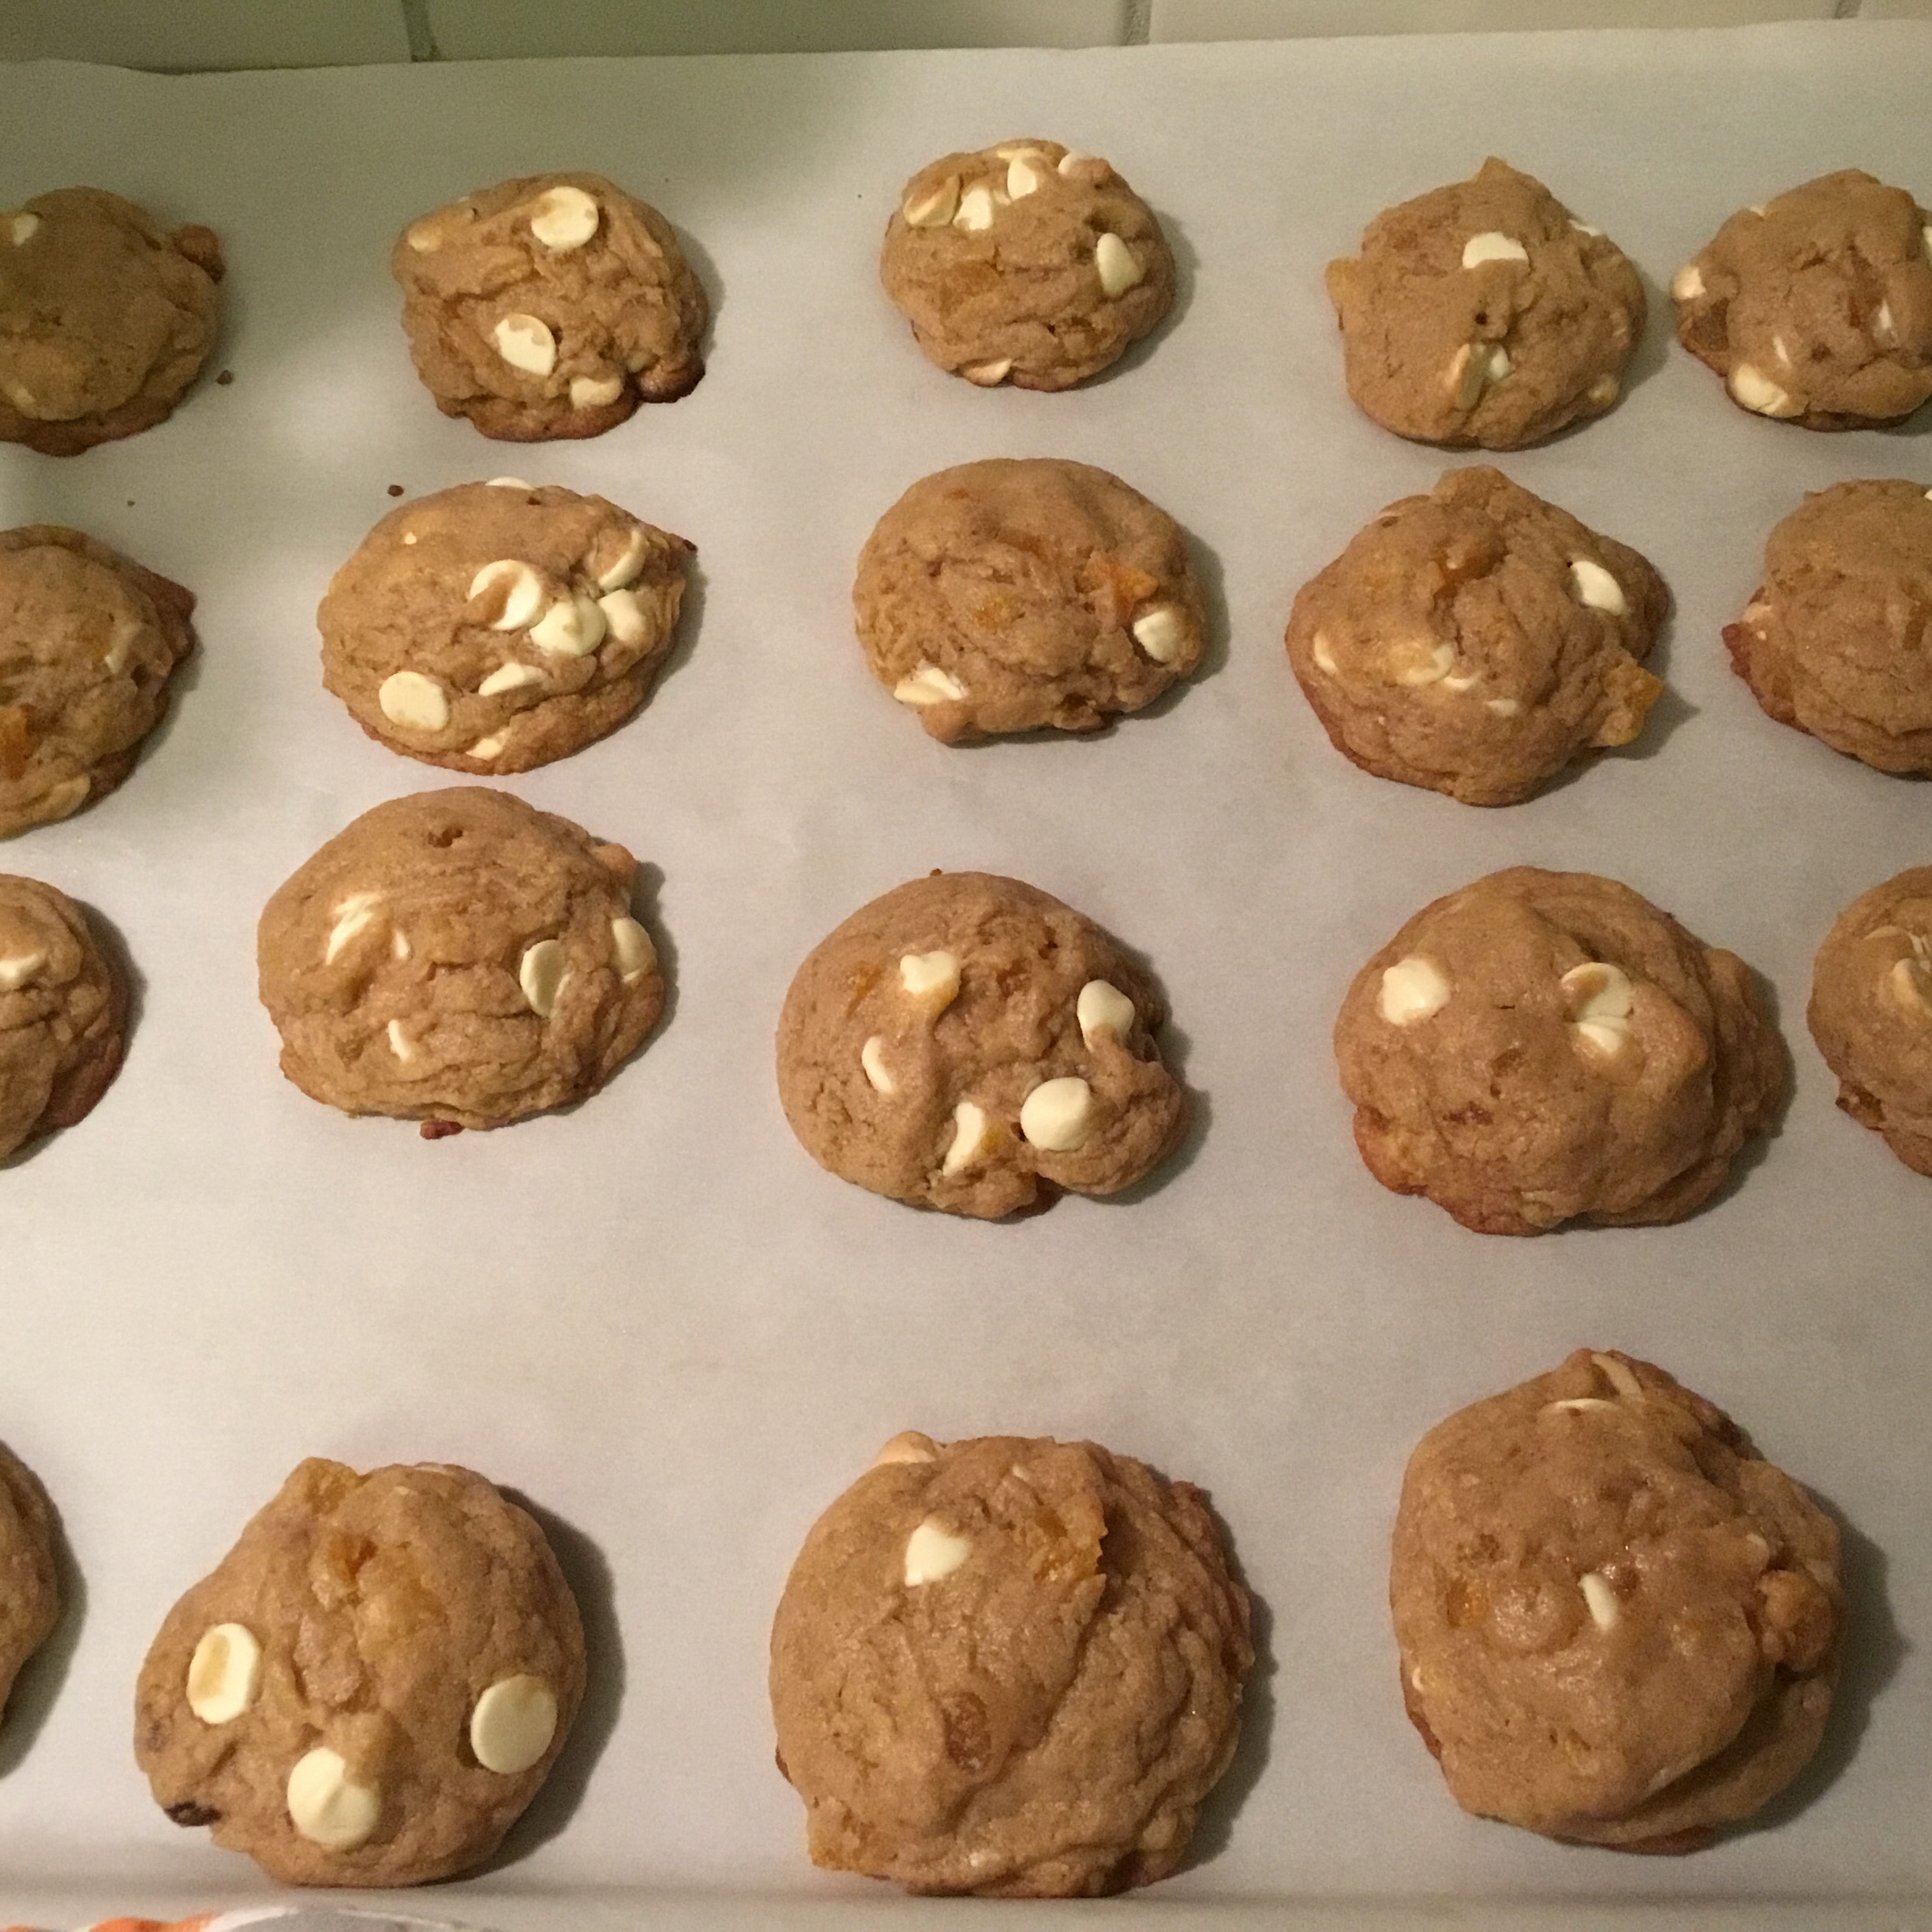 Apricot and White Chip Cookies with Almonds